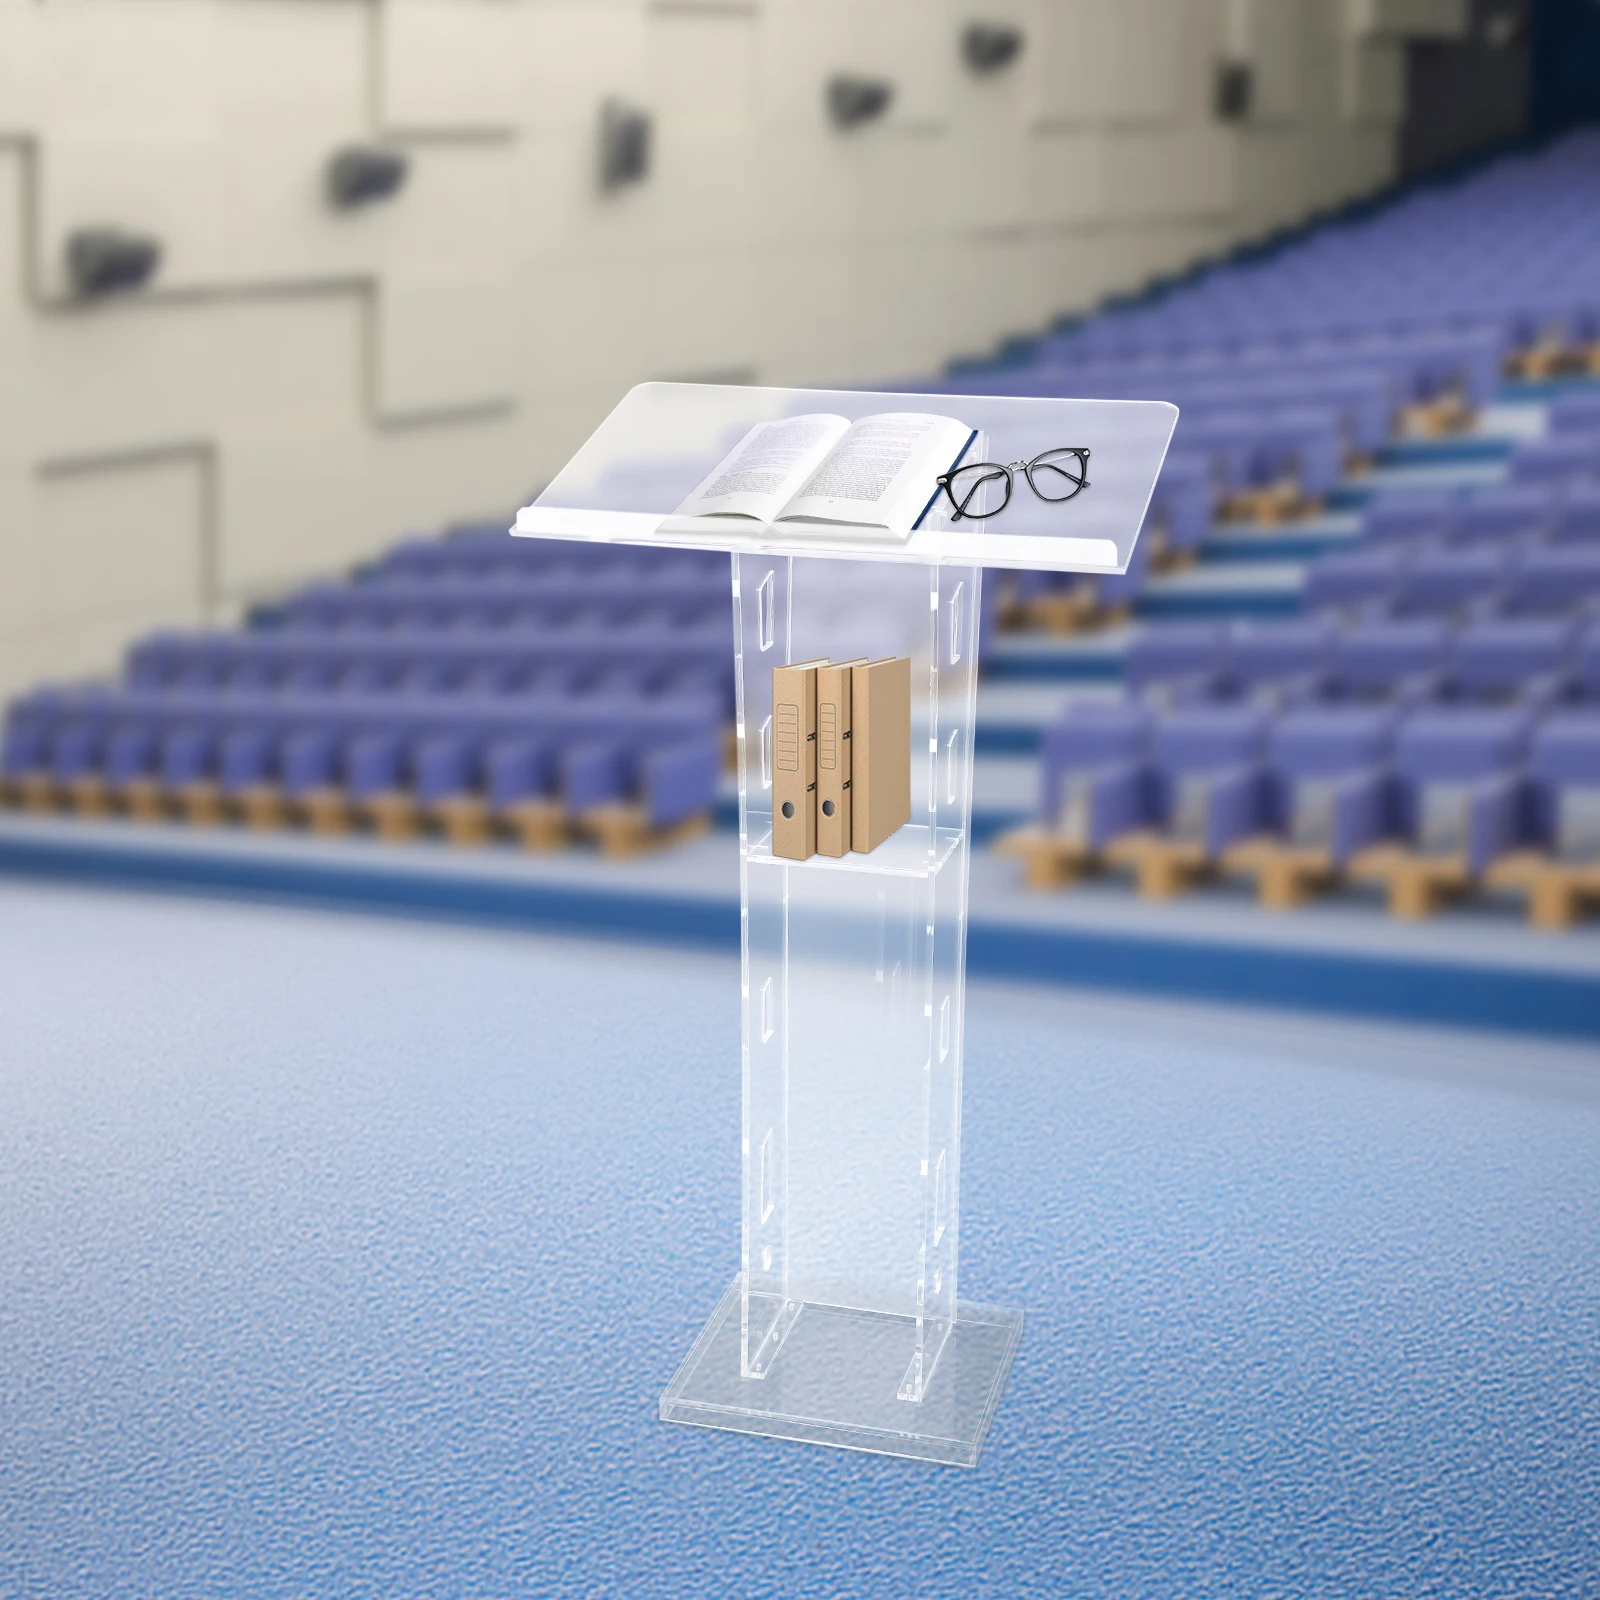 Acrylic Podium Clear Pulpit Conference Presentation Stand Church Lectern 43.3 inch Transparent Lectern School paperclips clear pins billfold 7 in 1 kit transparent acrylic box packaging multi purpose desktop binding supplies set